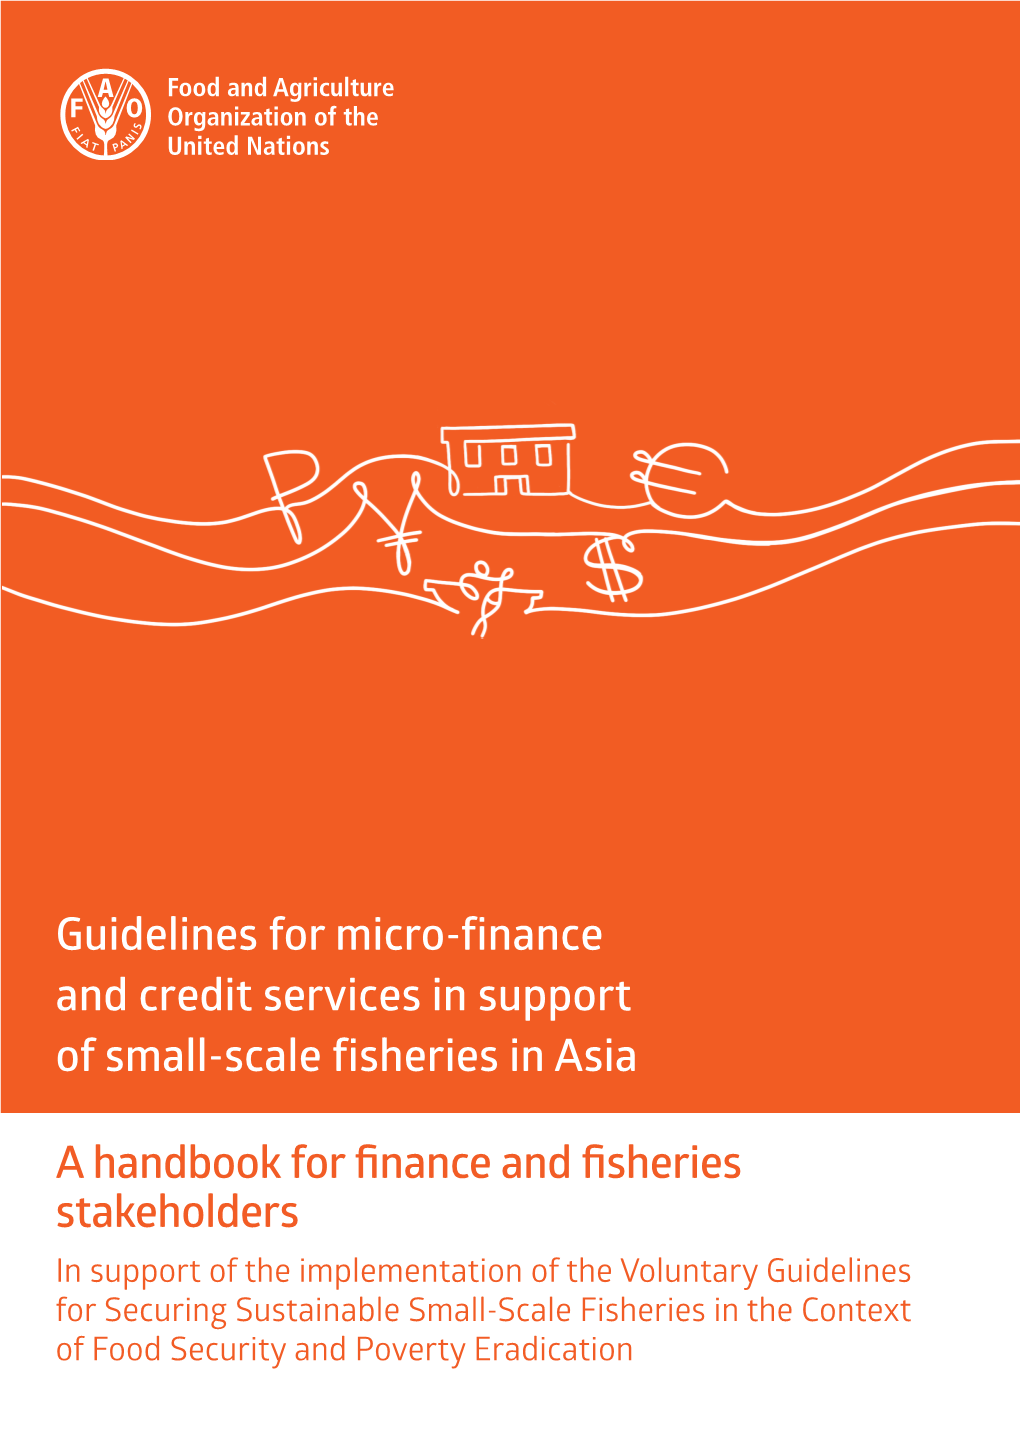 Guidelines for Micro-Finance and Credit Services in Support of Small-Scale Fisheries in Asia